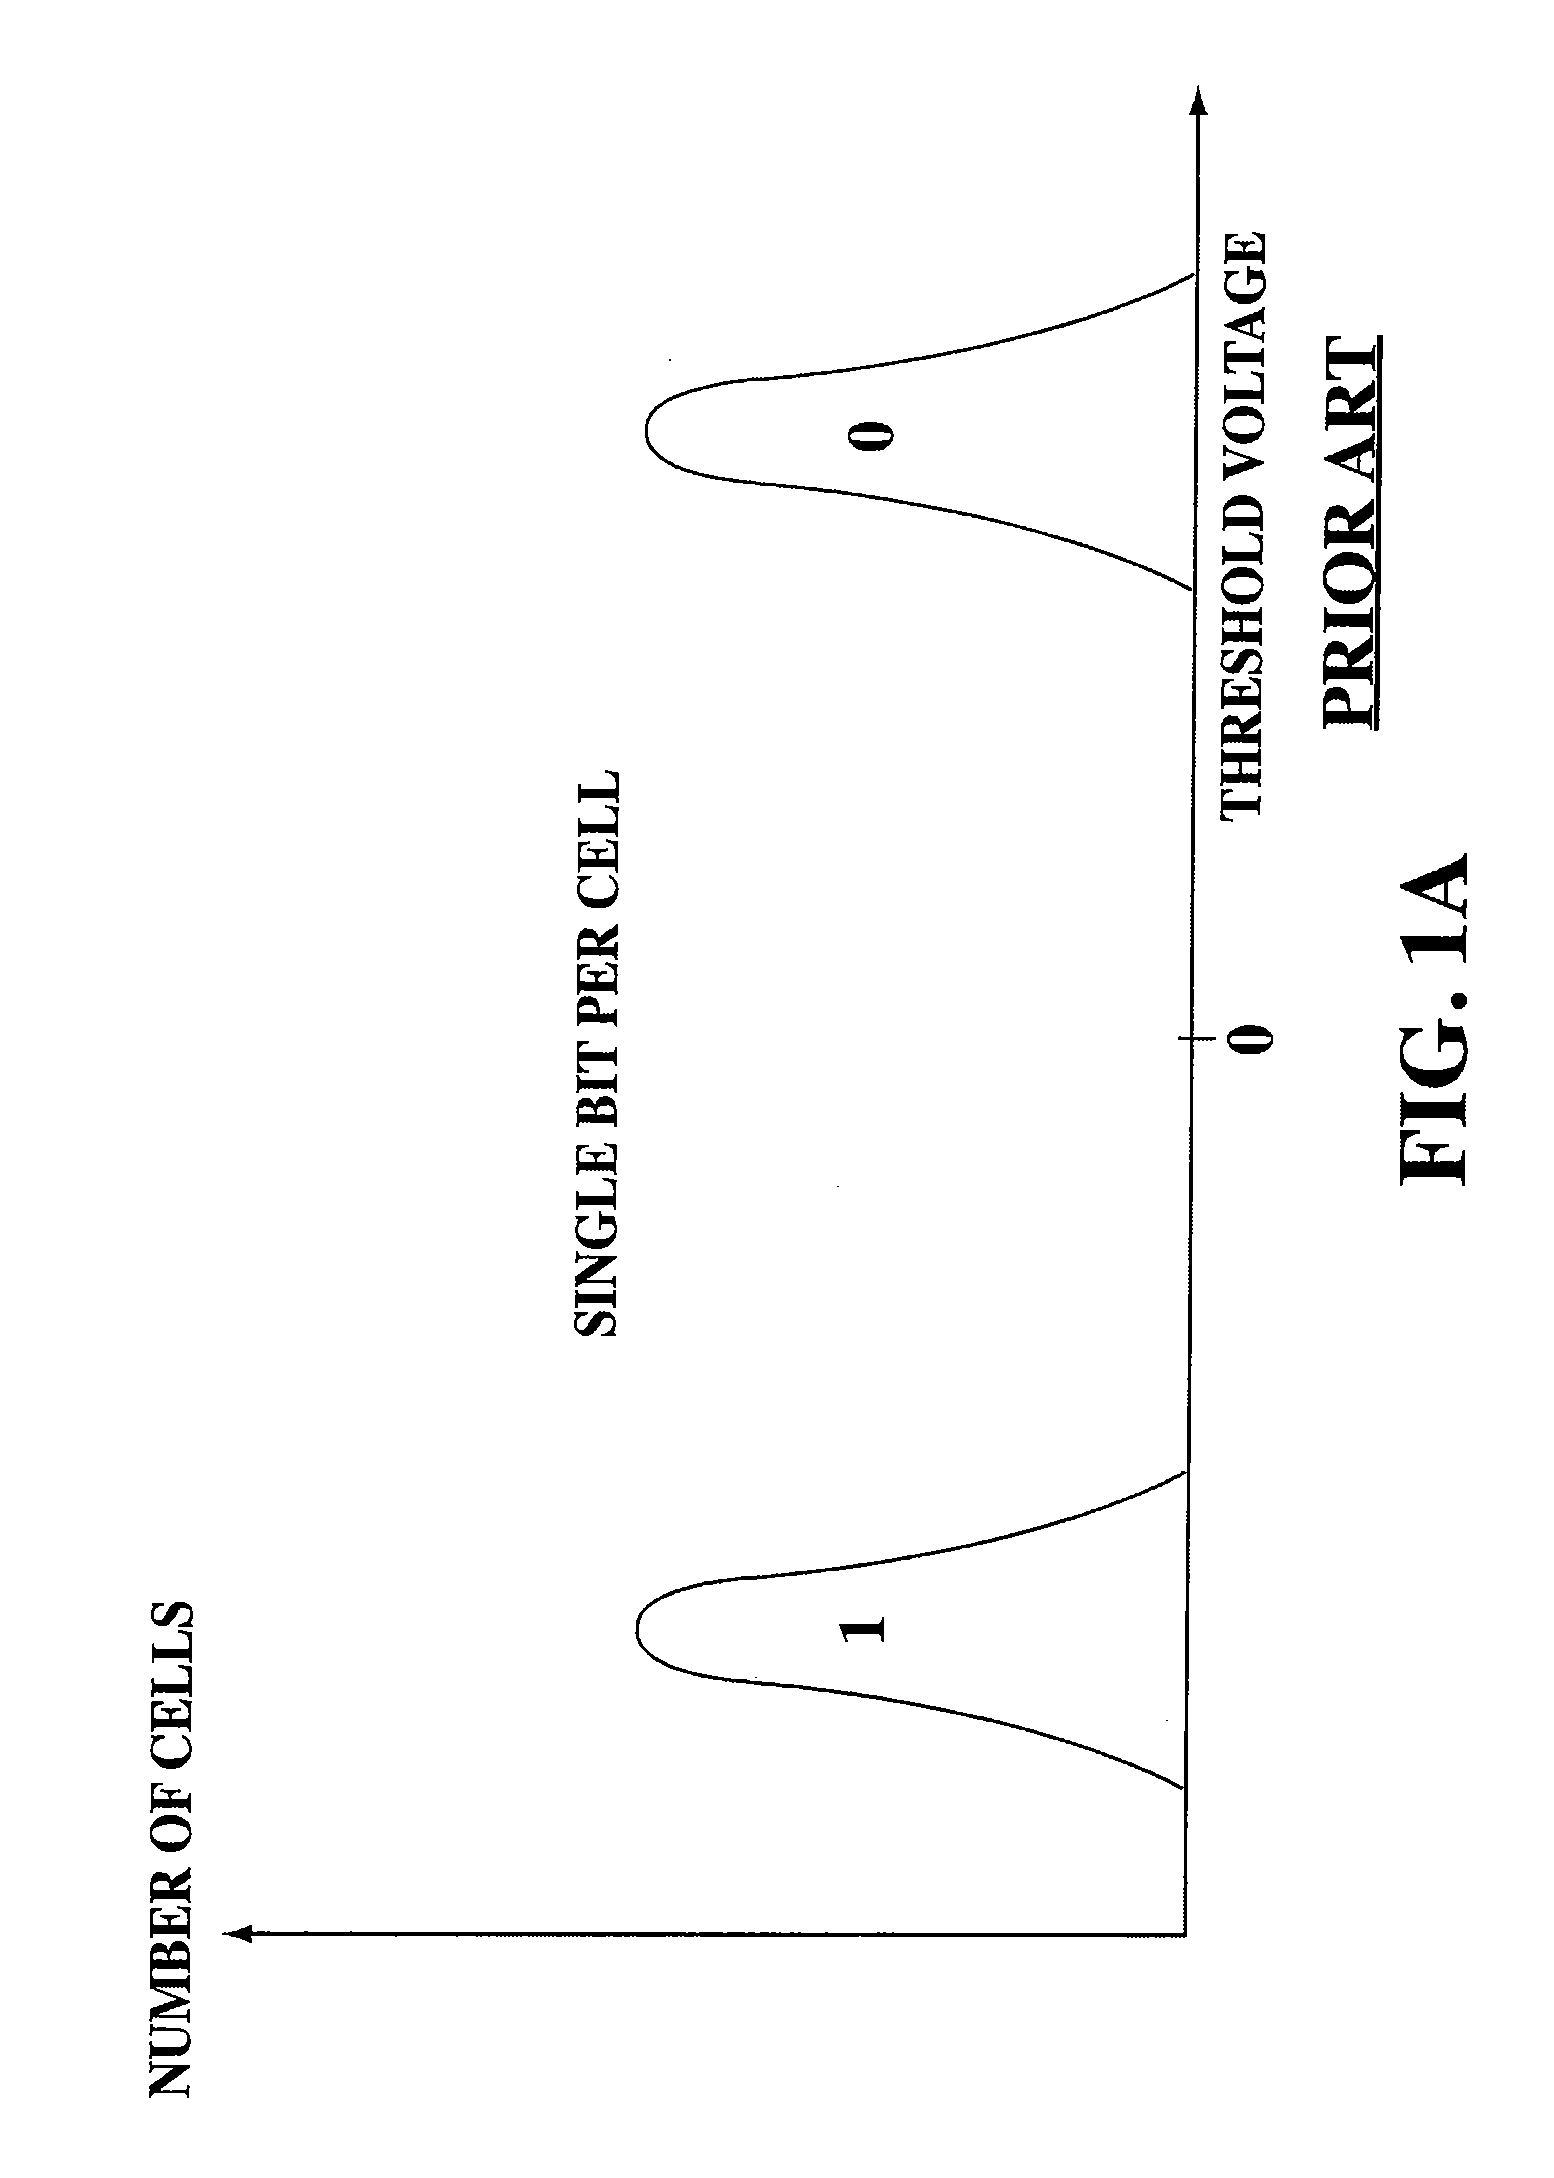 NAND Flash Memory Controller Exporting a NAND Interface